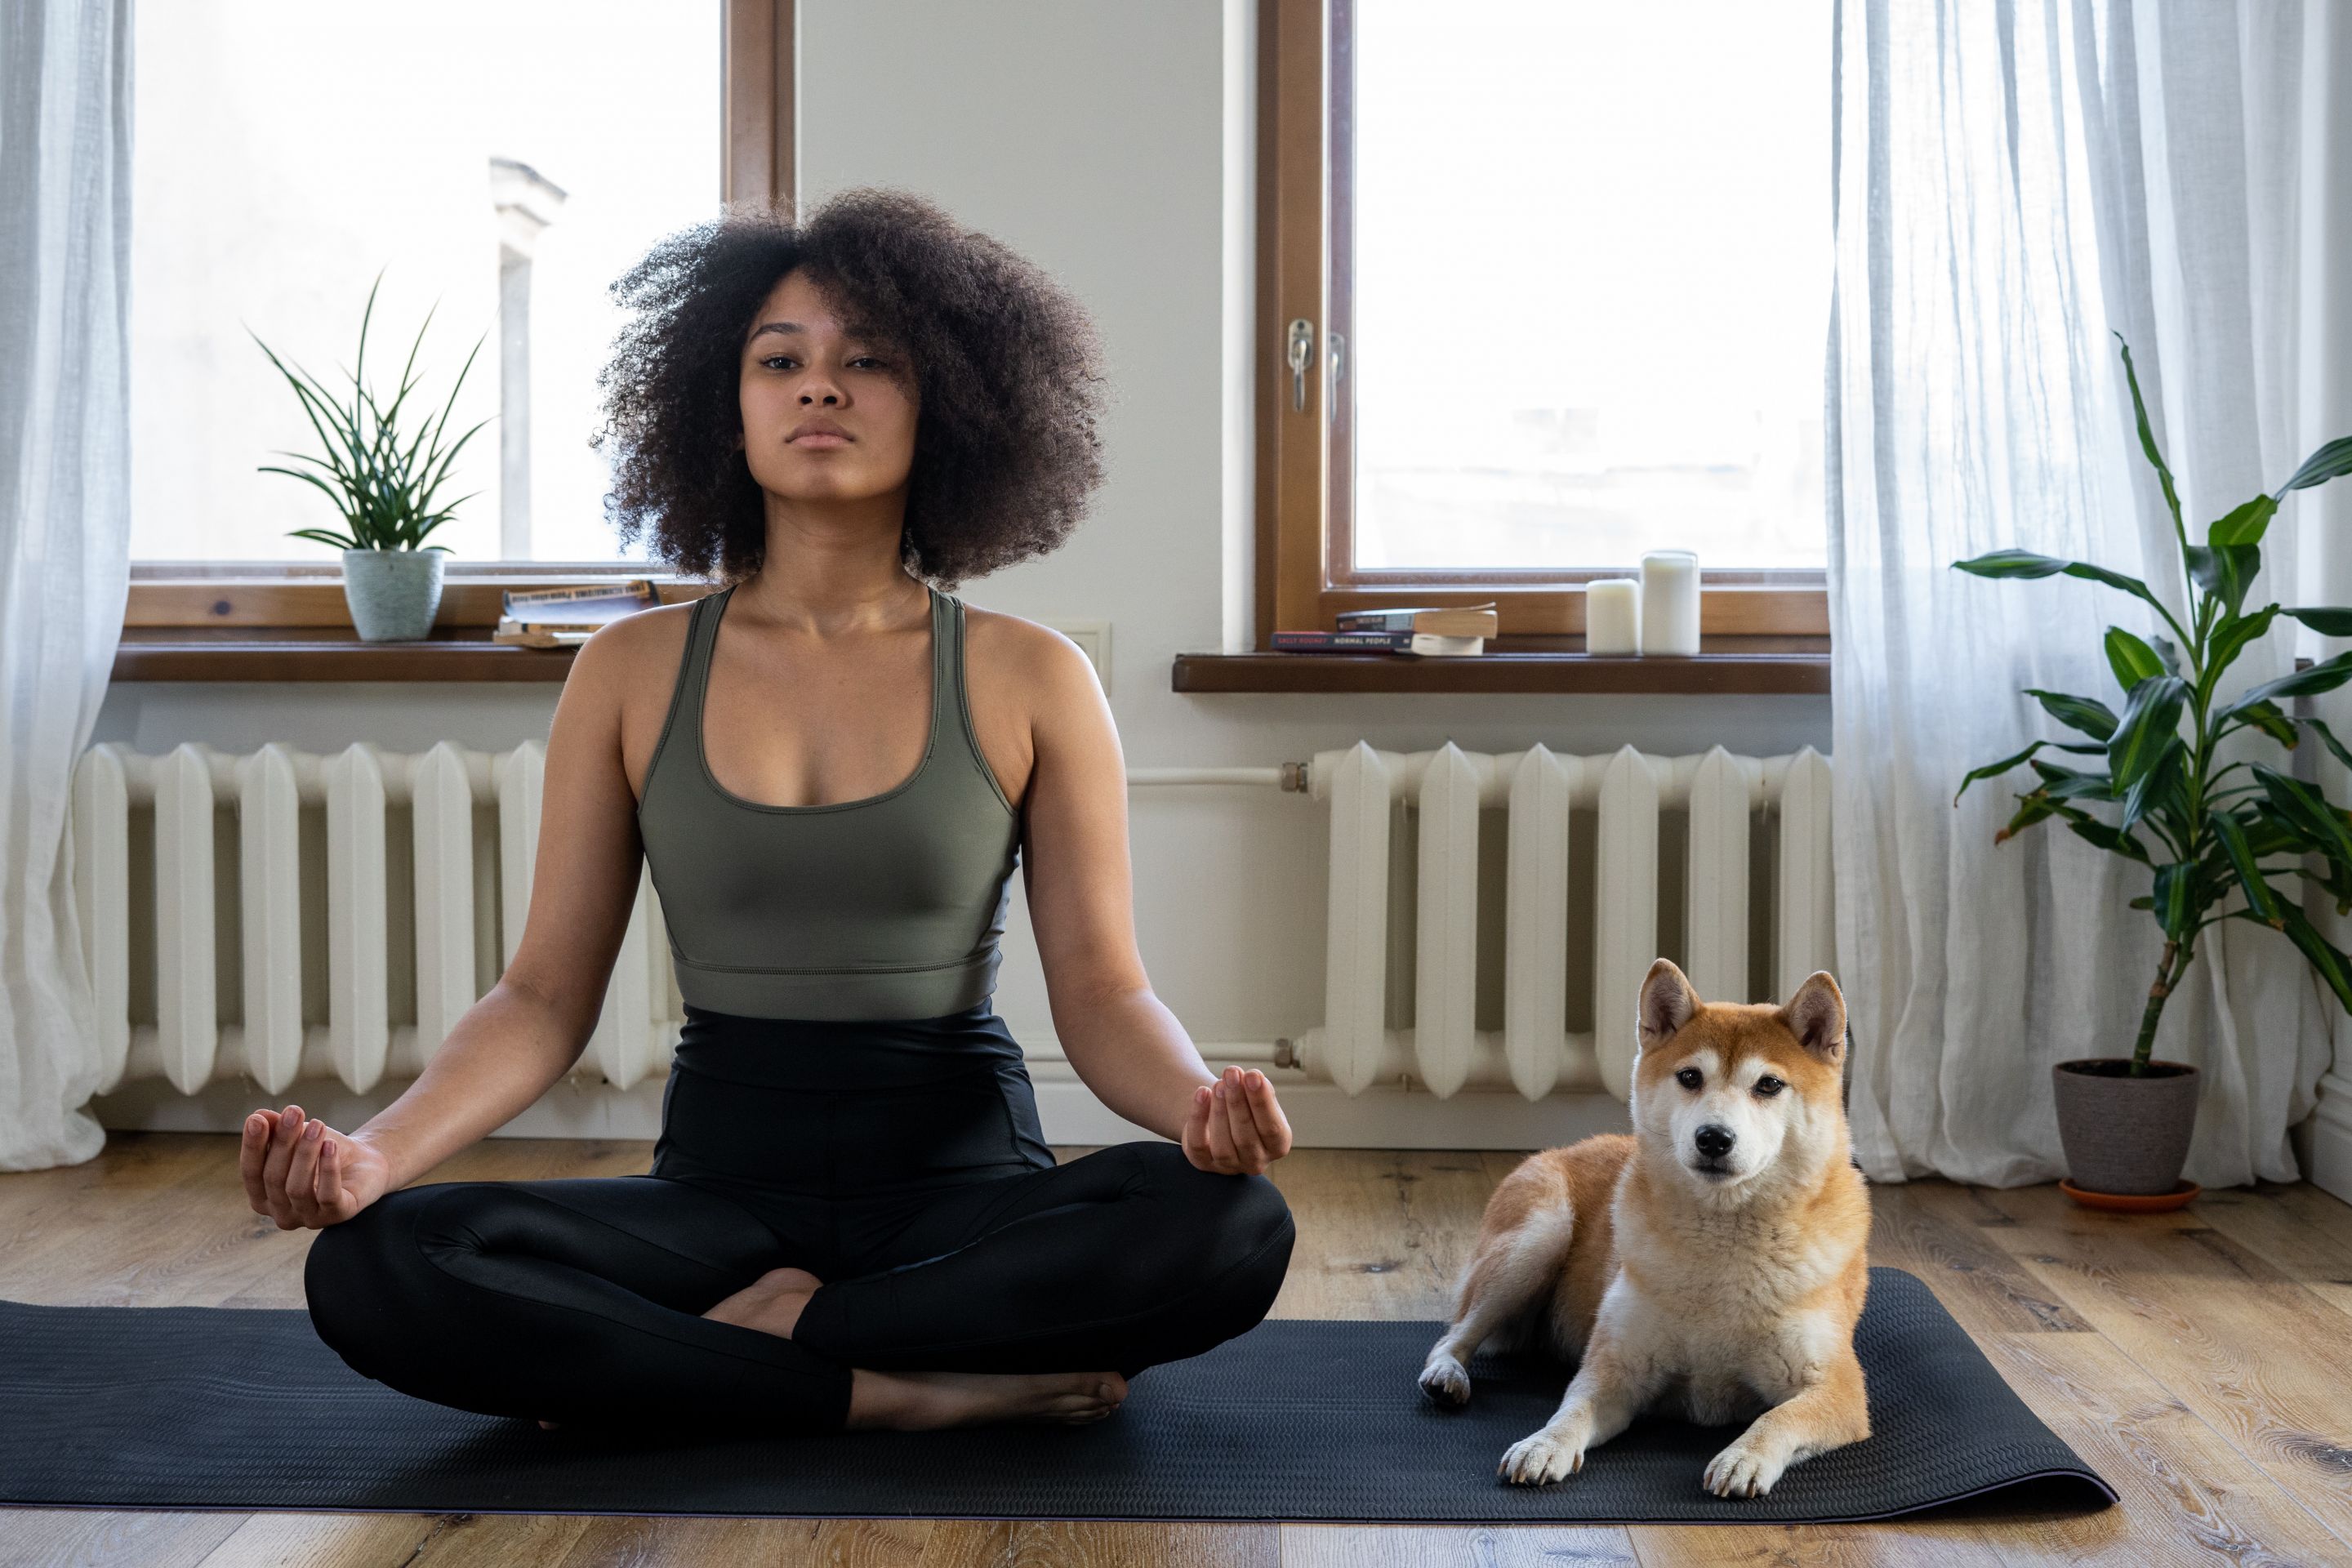 The direct correlation between yoga and mindfulness